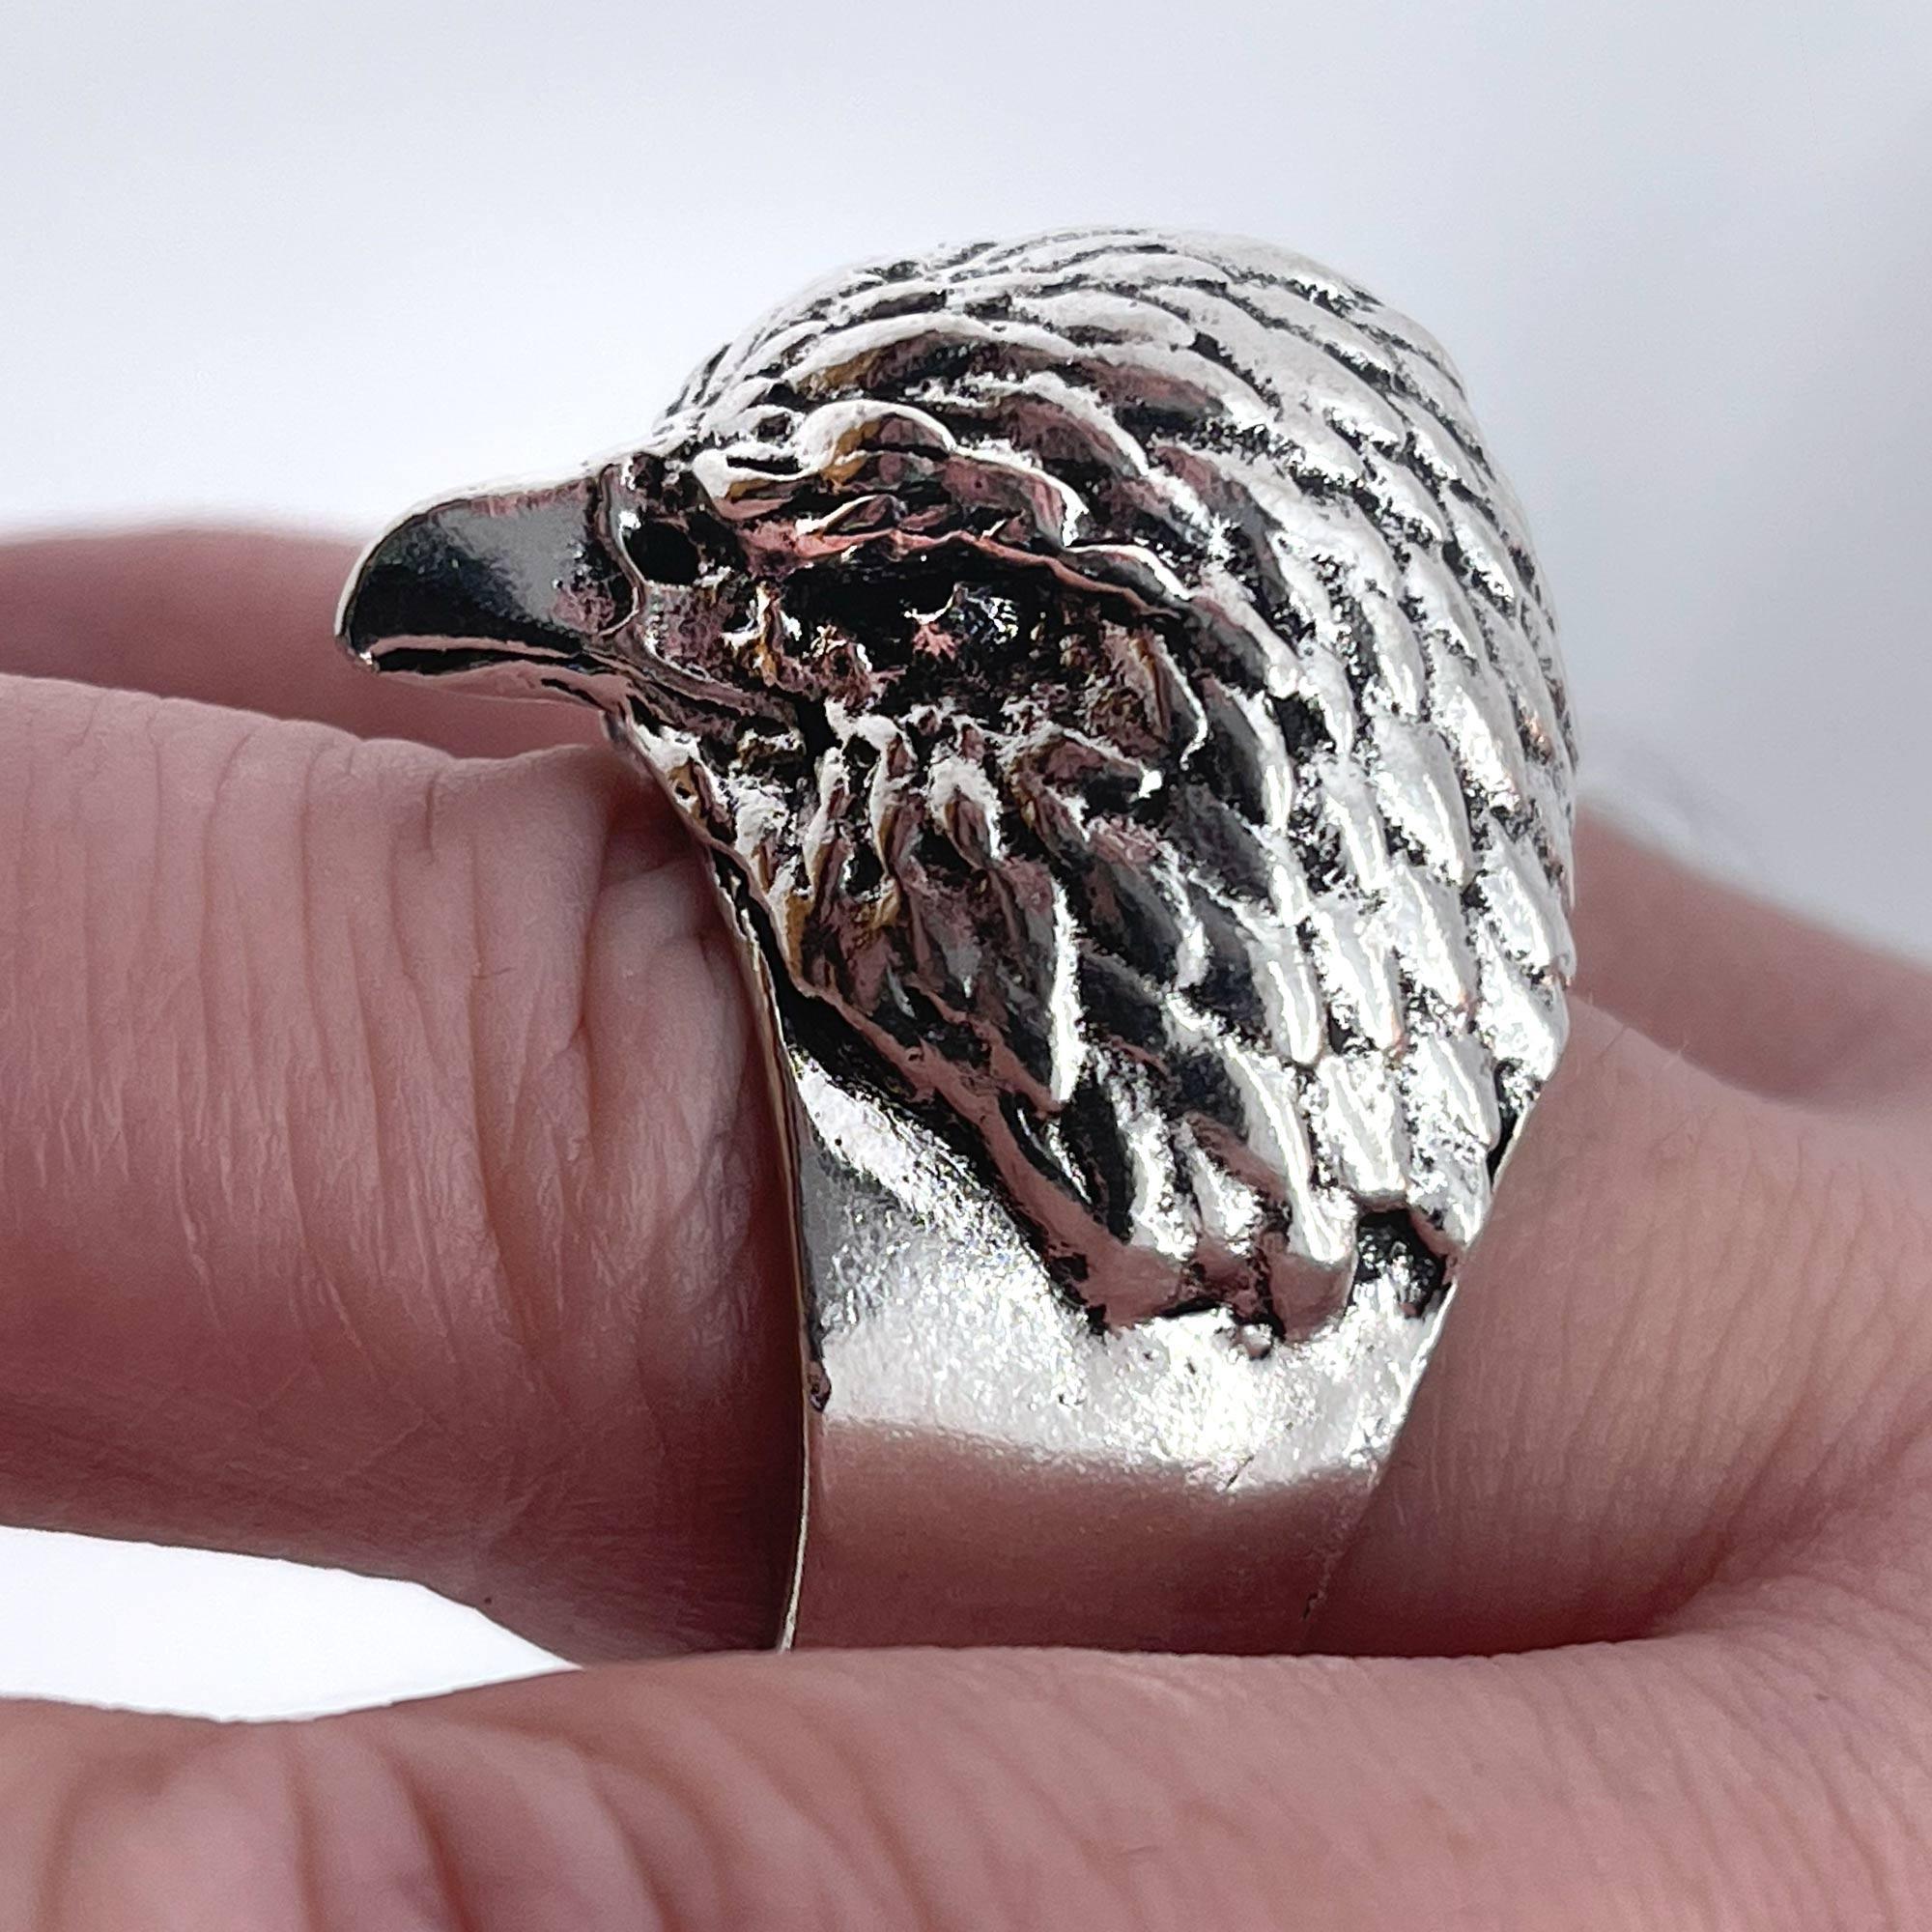 "Debate My Eagles" Resizable Eagle Ring - No System